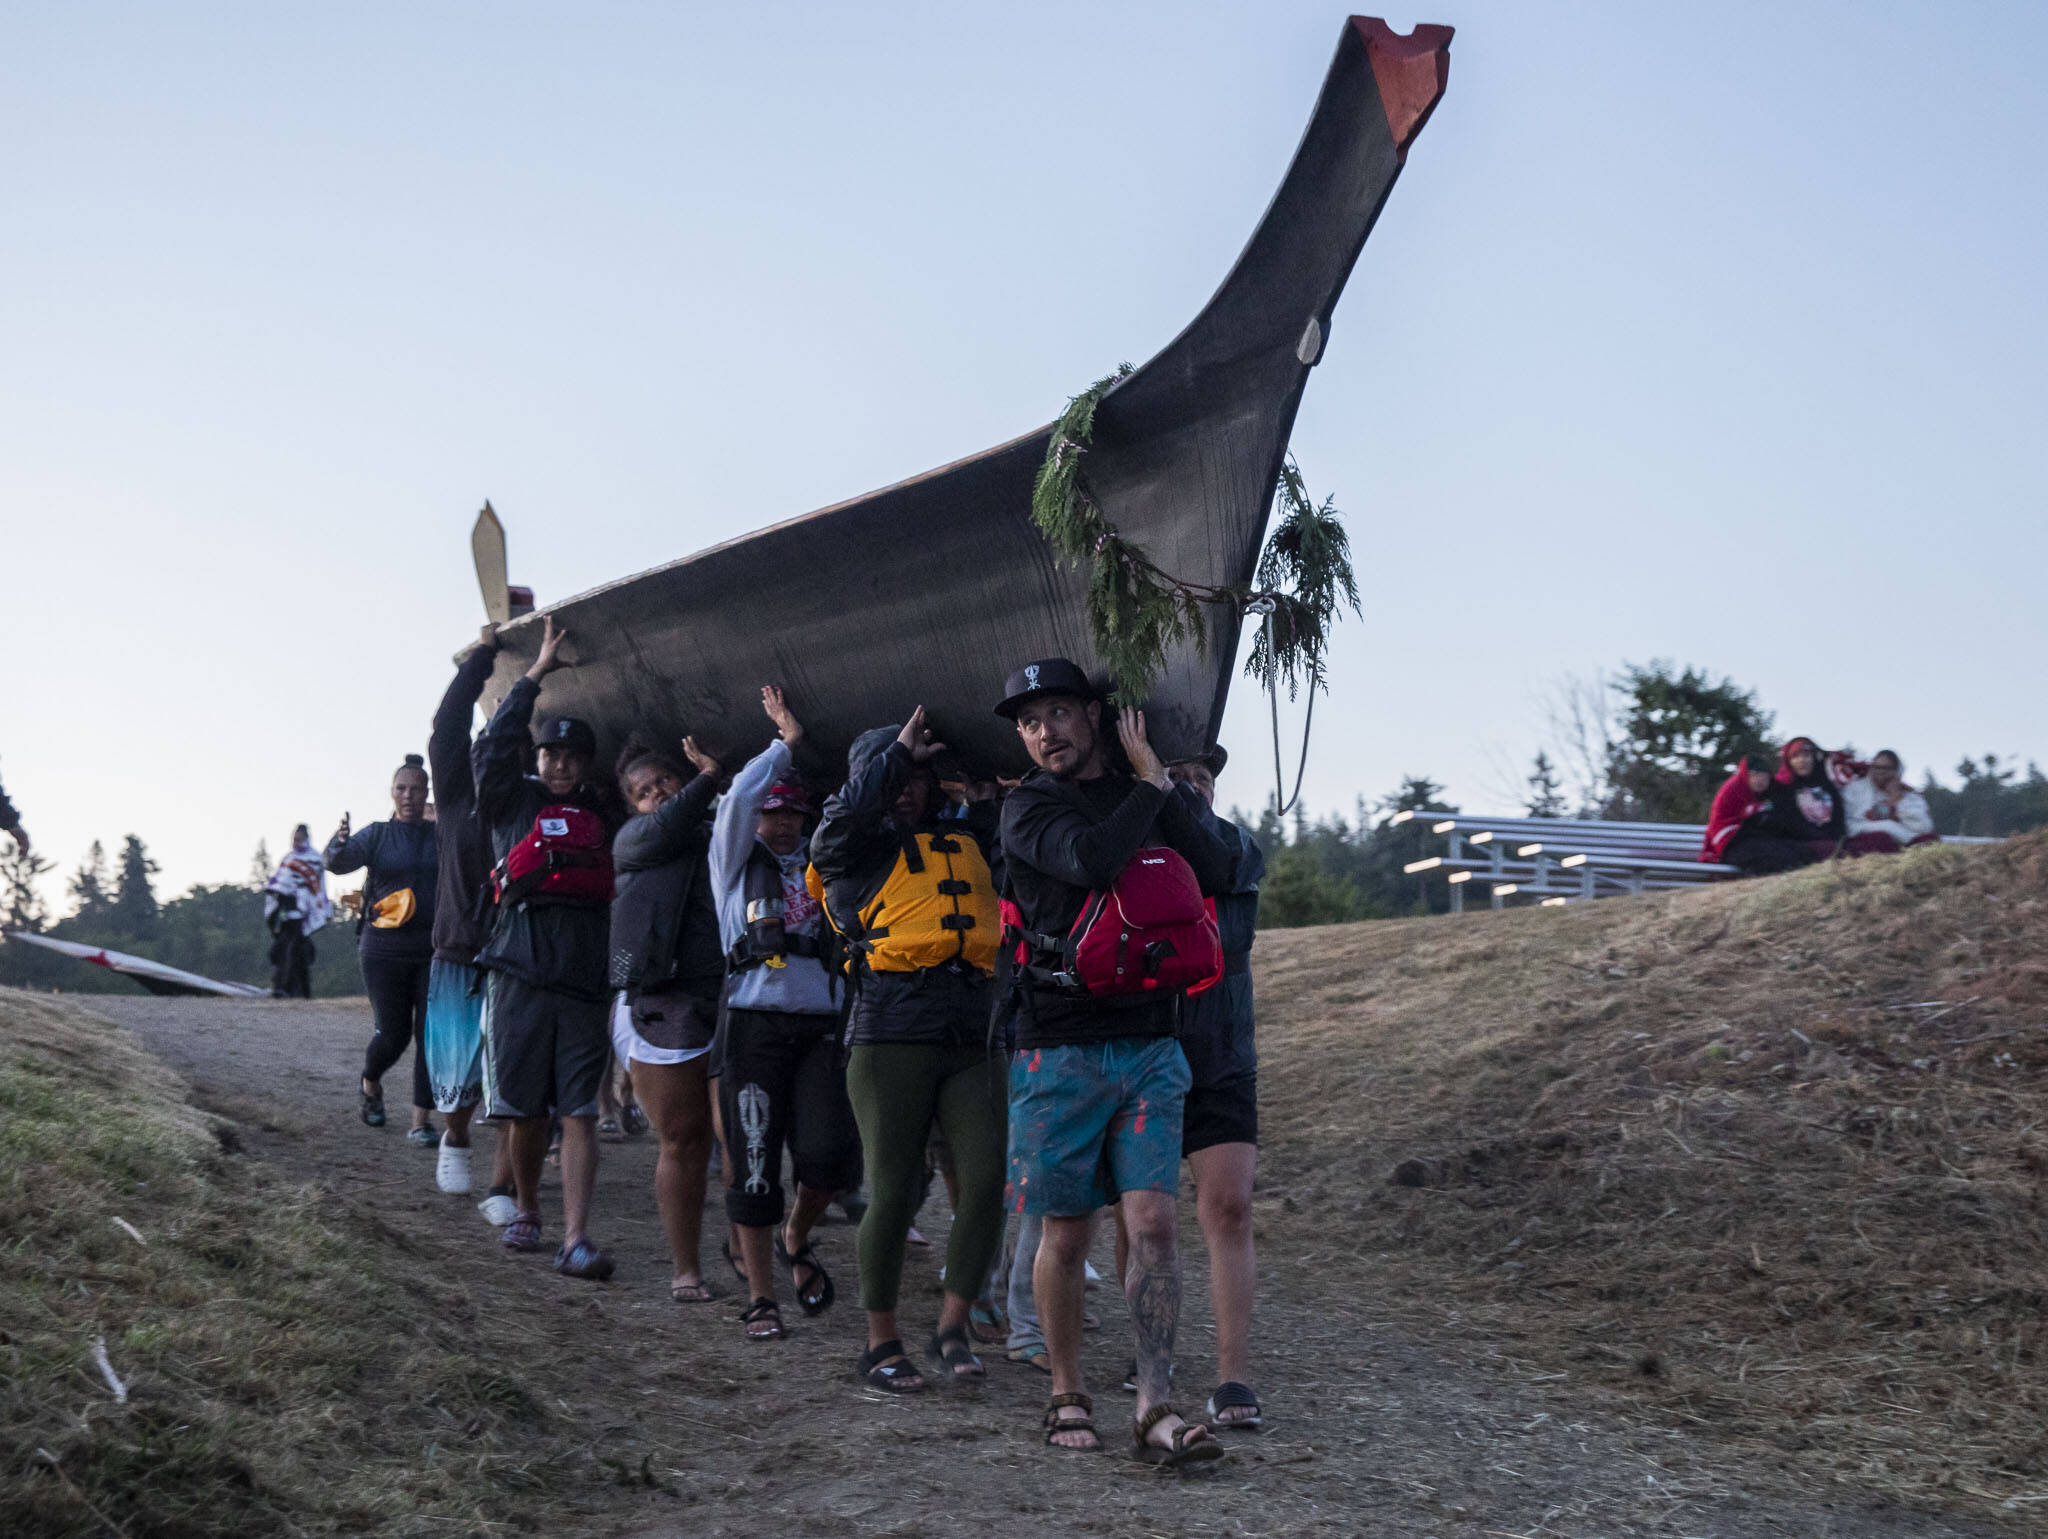 Canoe journey, symbol of 'carrying our traditions on,' departs Tulalip |  HeraldNet.com